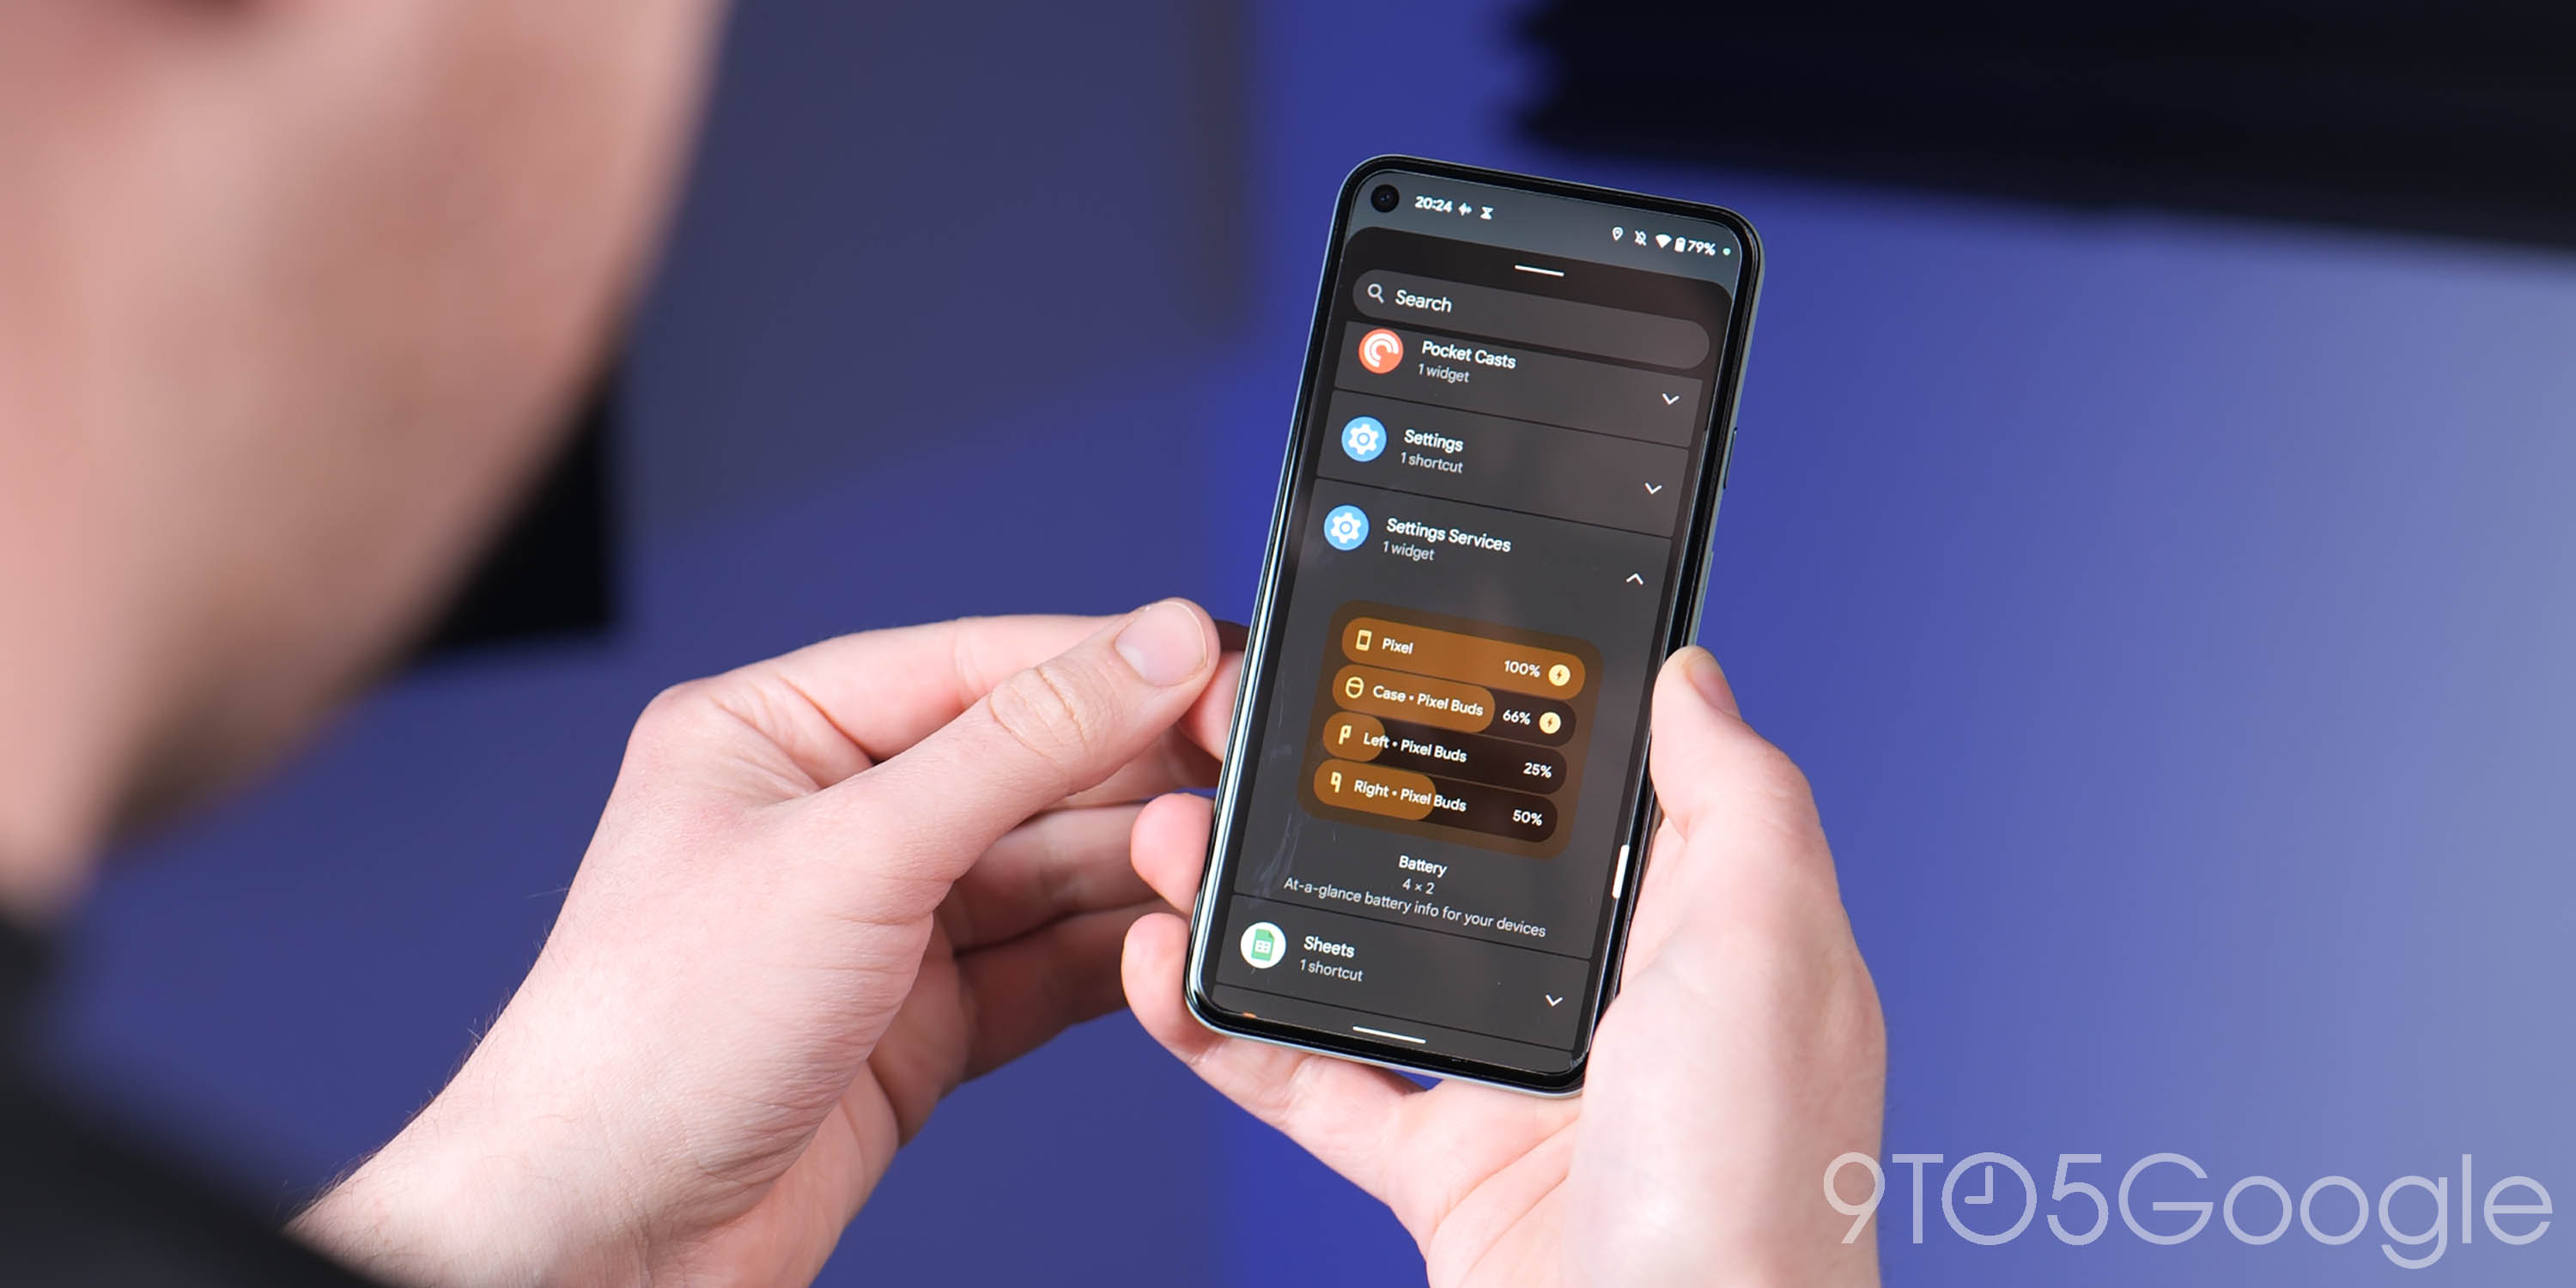 March 2022 Feature Drop introduces new Bluetooth battery tracking widget